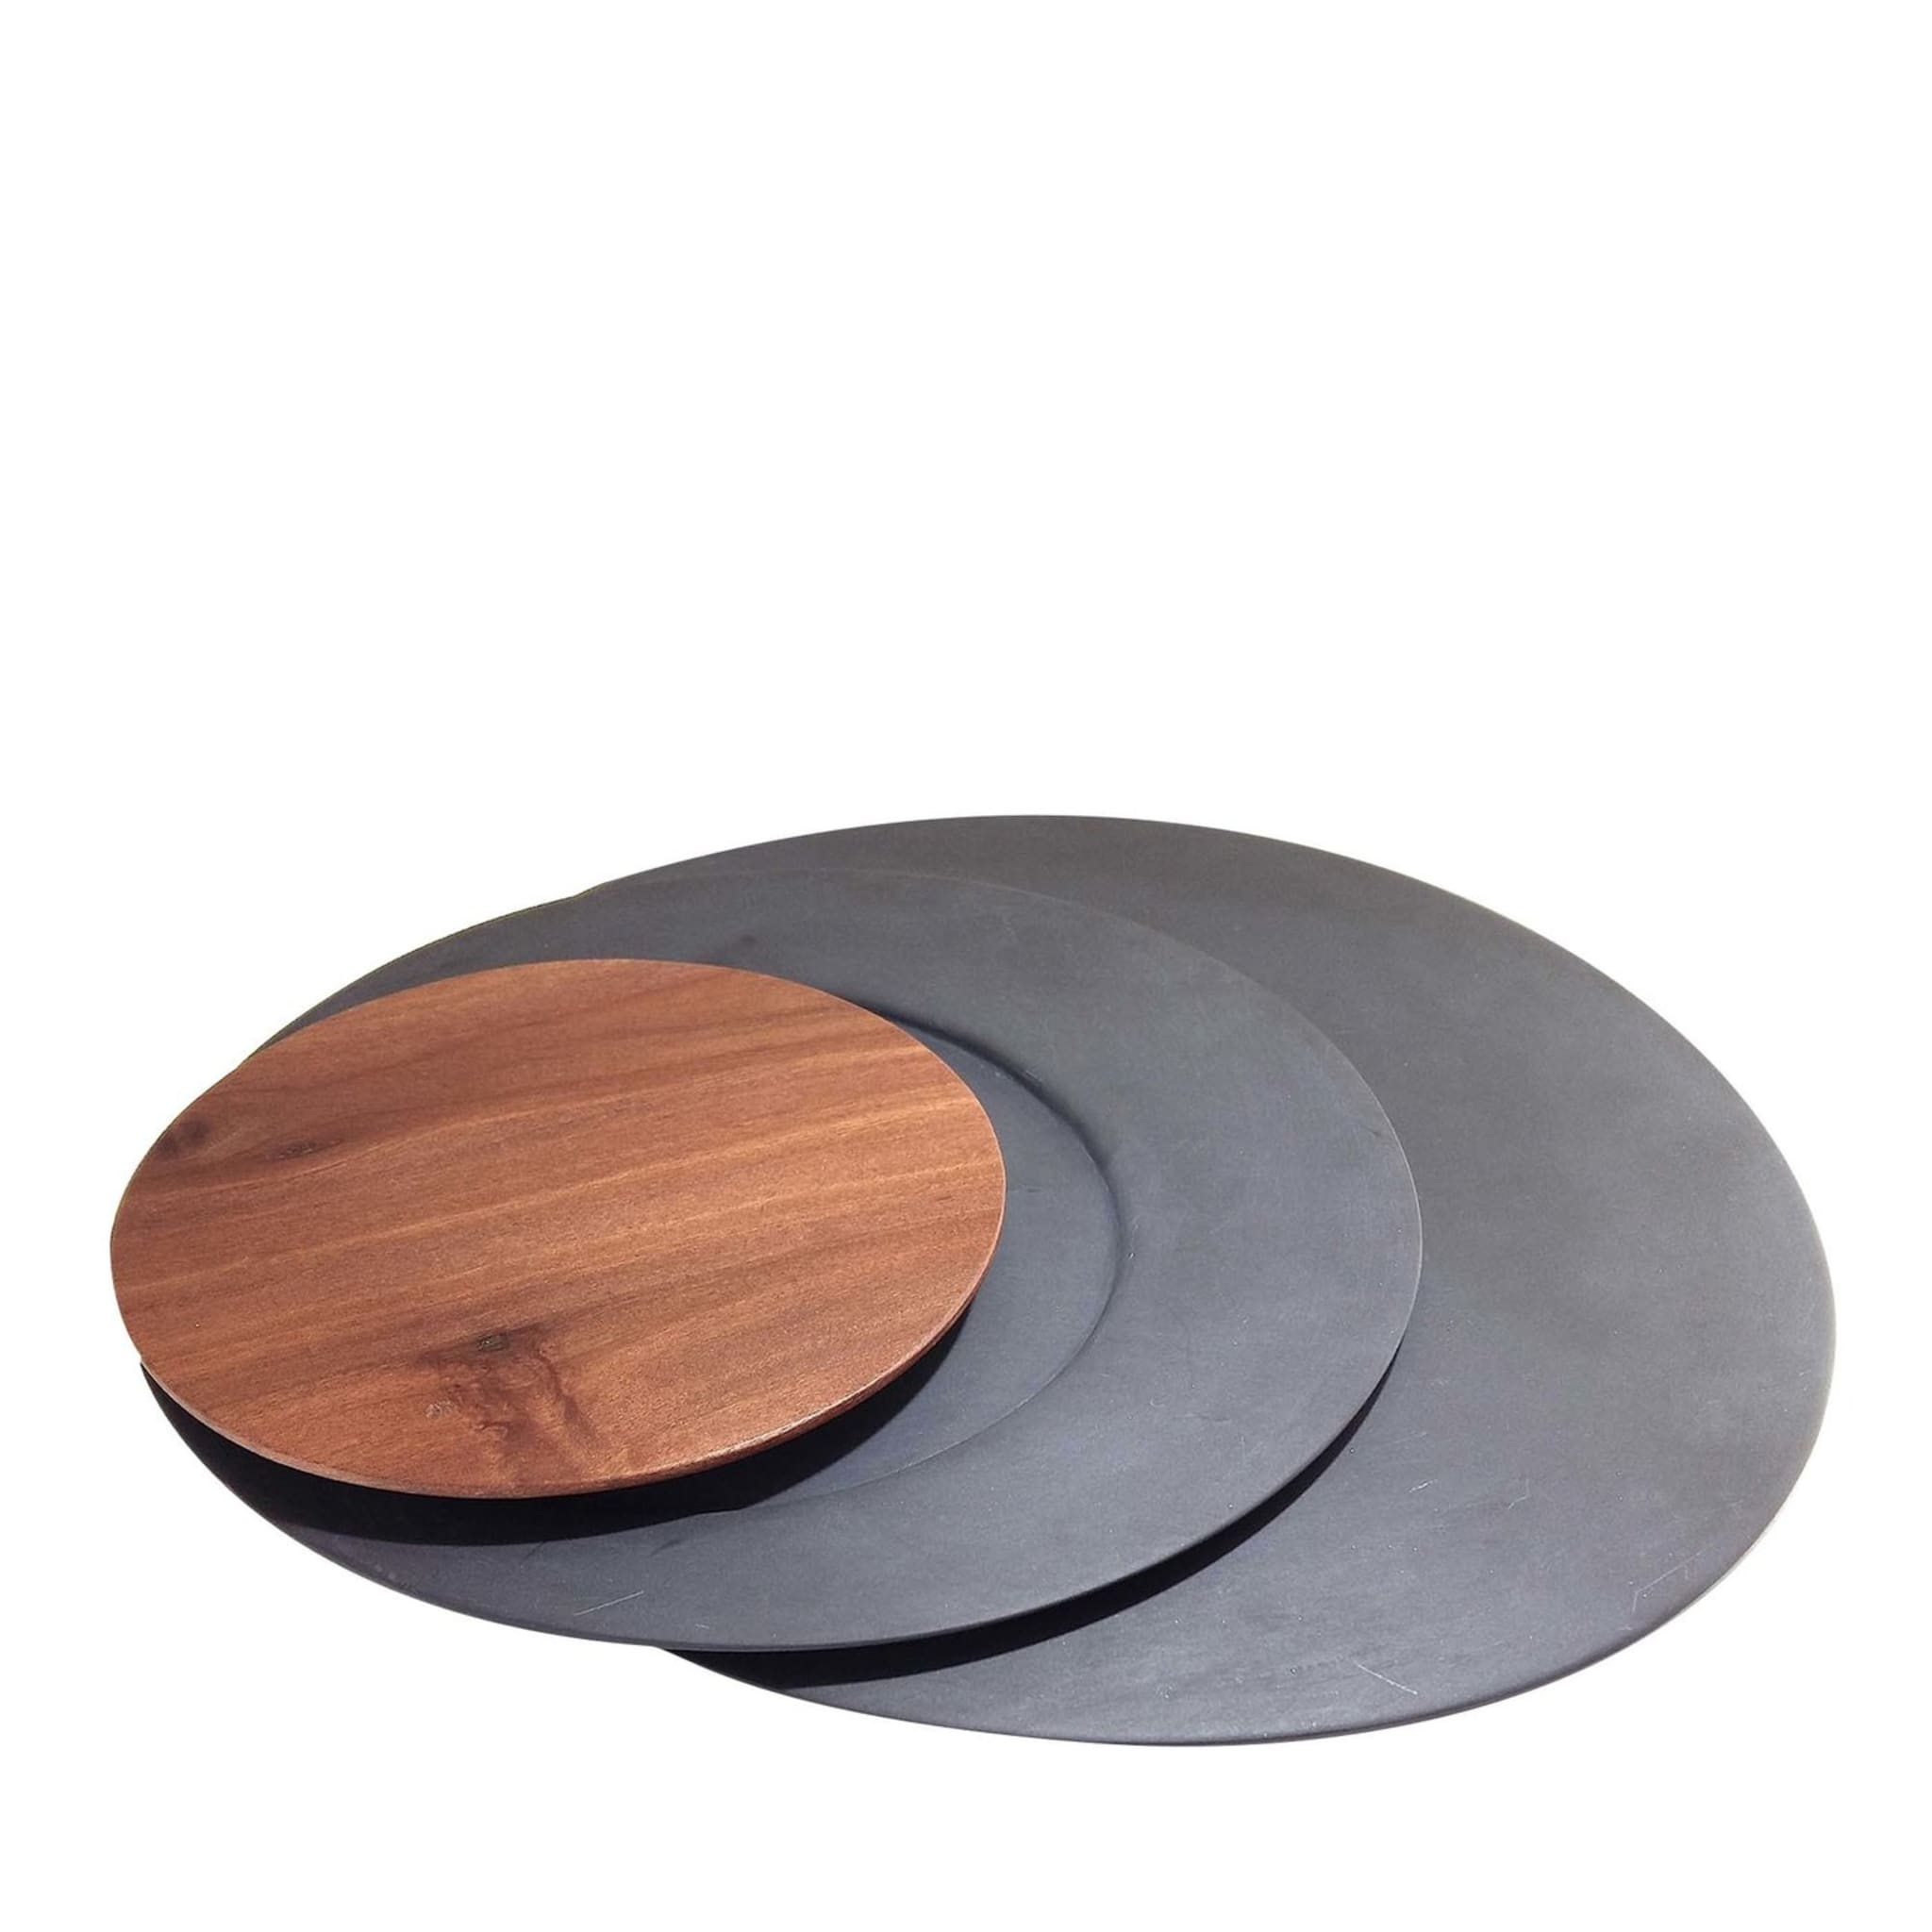 Lune #1 Set of 3 Slate and Walnut Plates by Roberto Monte - Main view